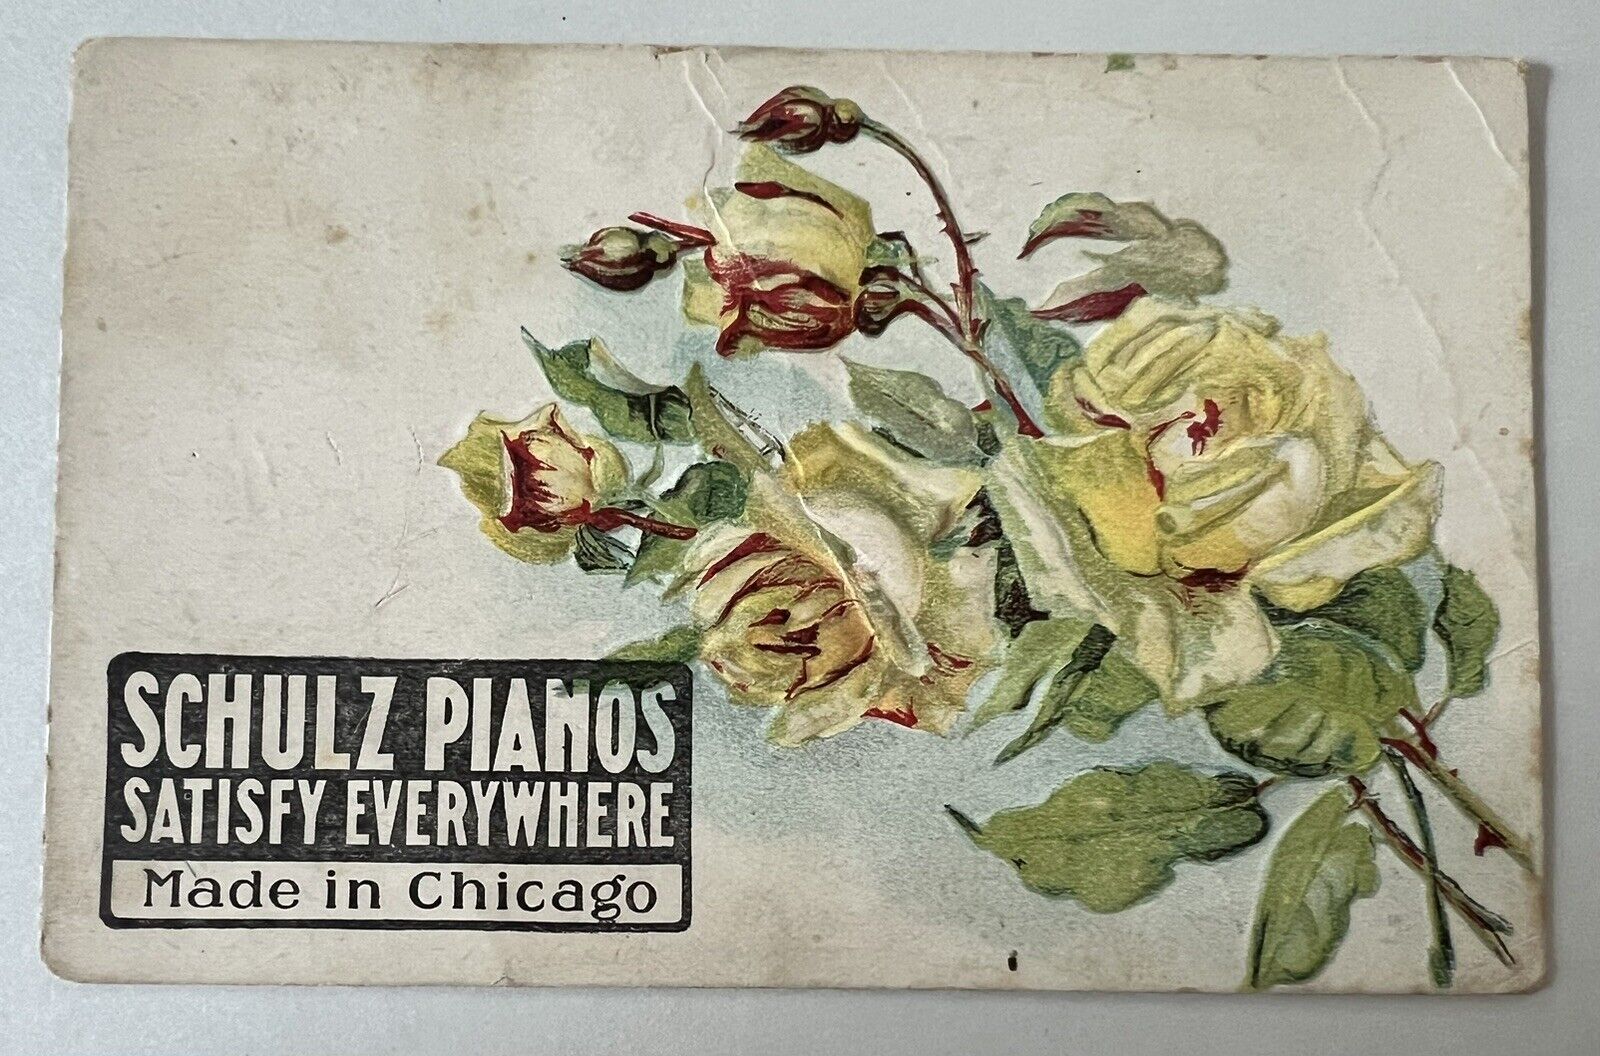 Advertising Schulz Pianos Made In Chicago Flowers 1917 Vintage Postcard